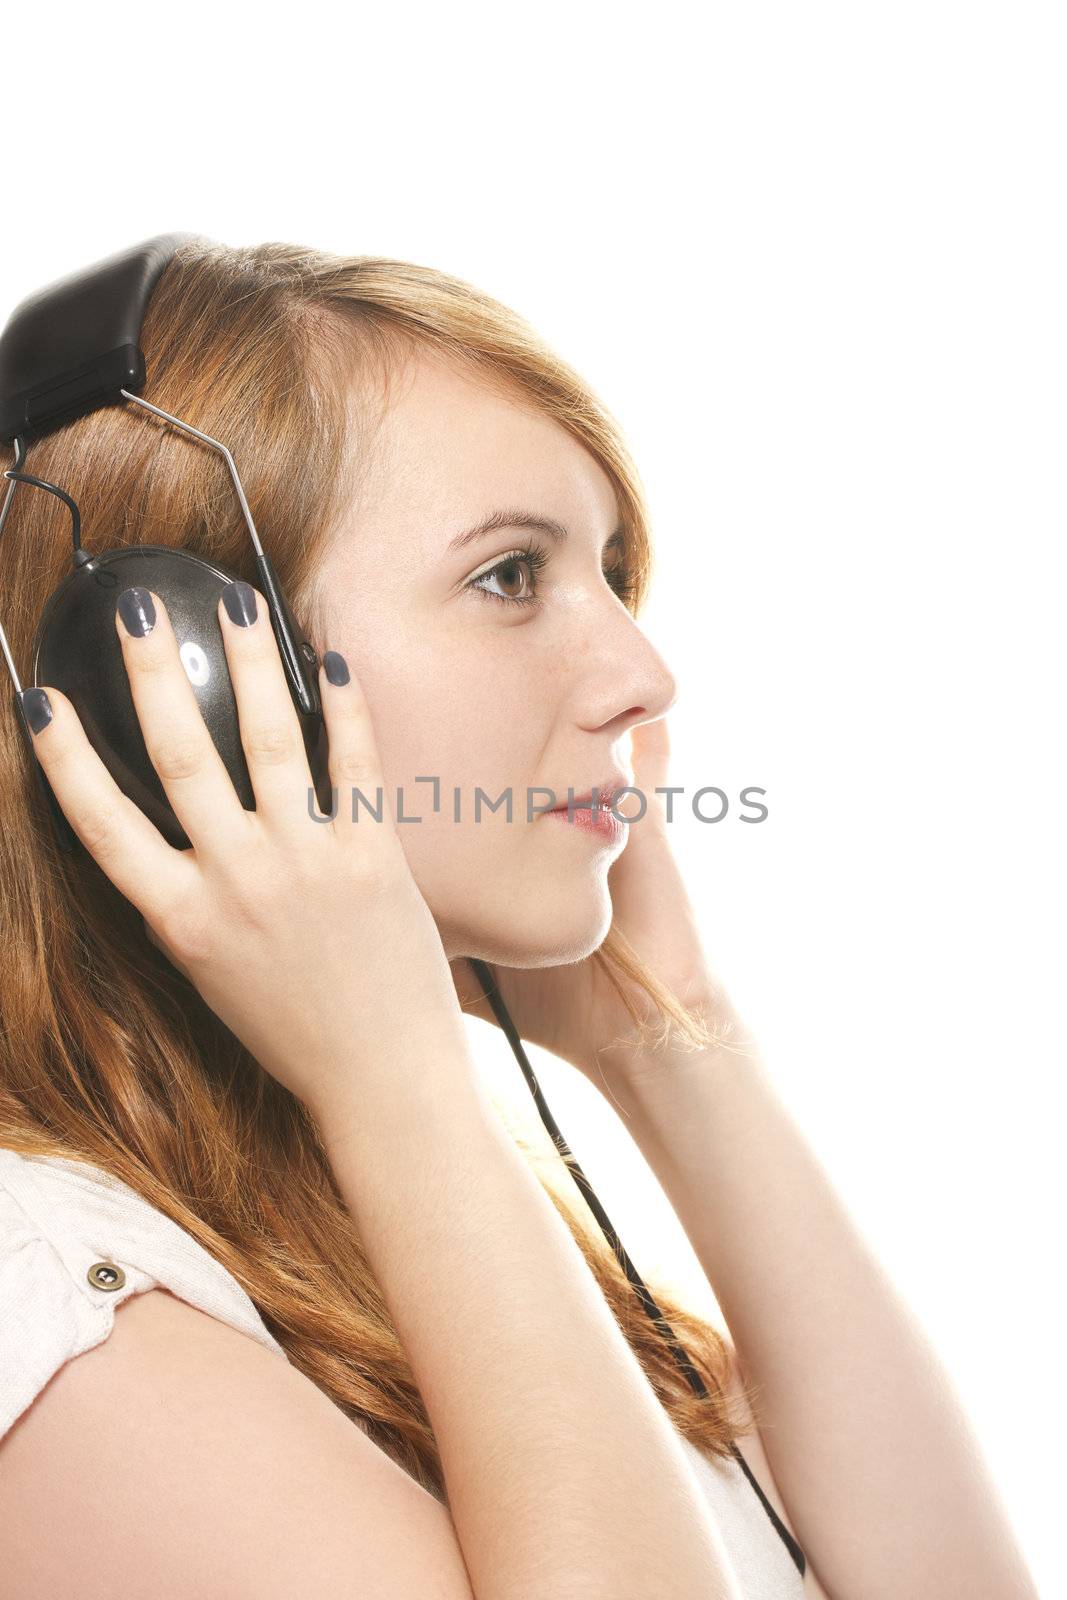 young dreamy redhead woman listening to music with her headphones on white background